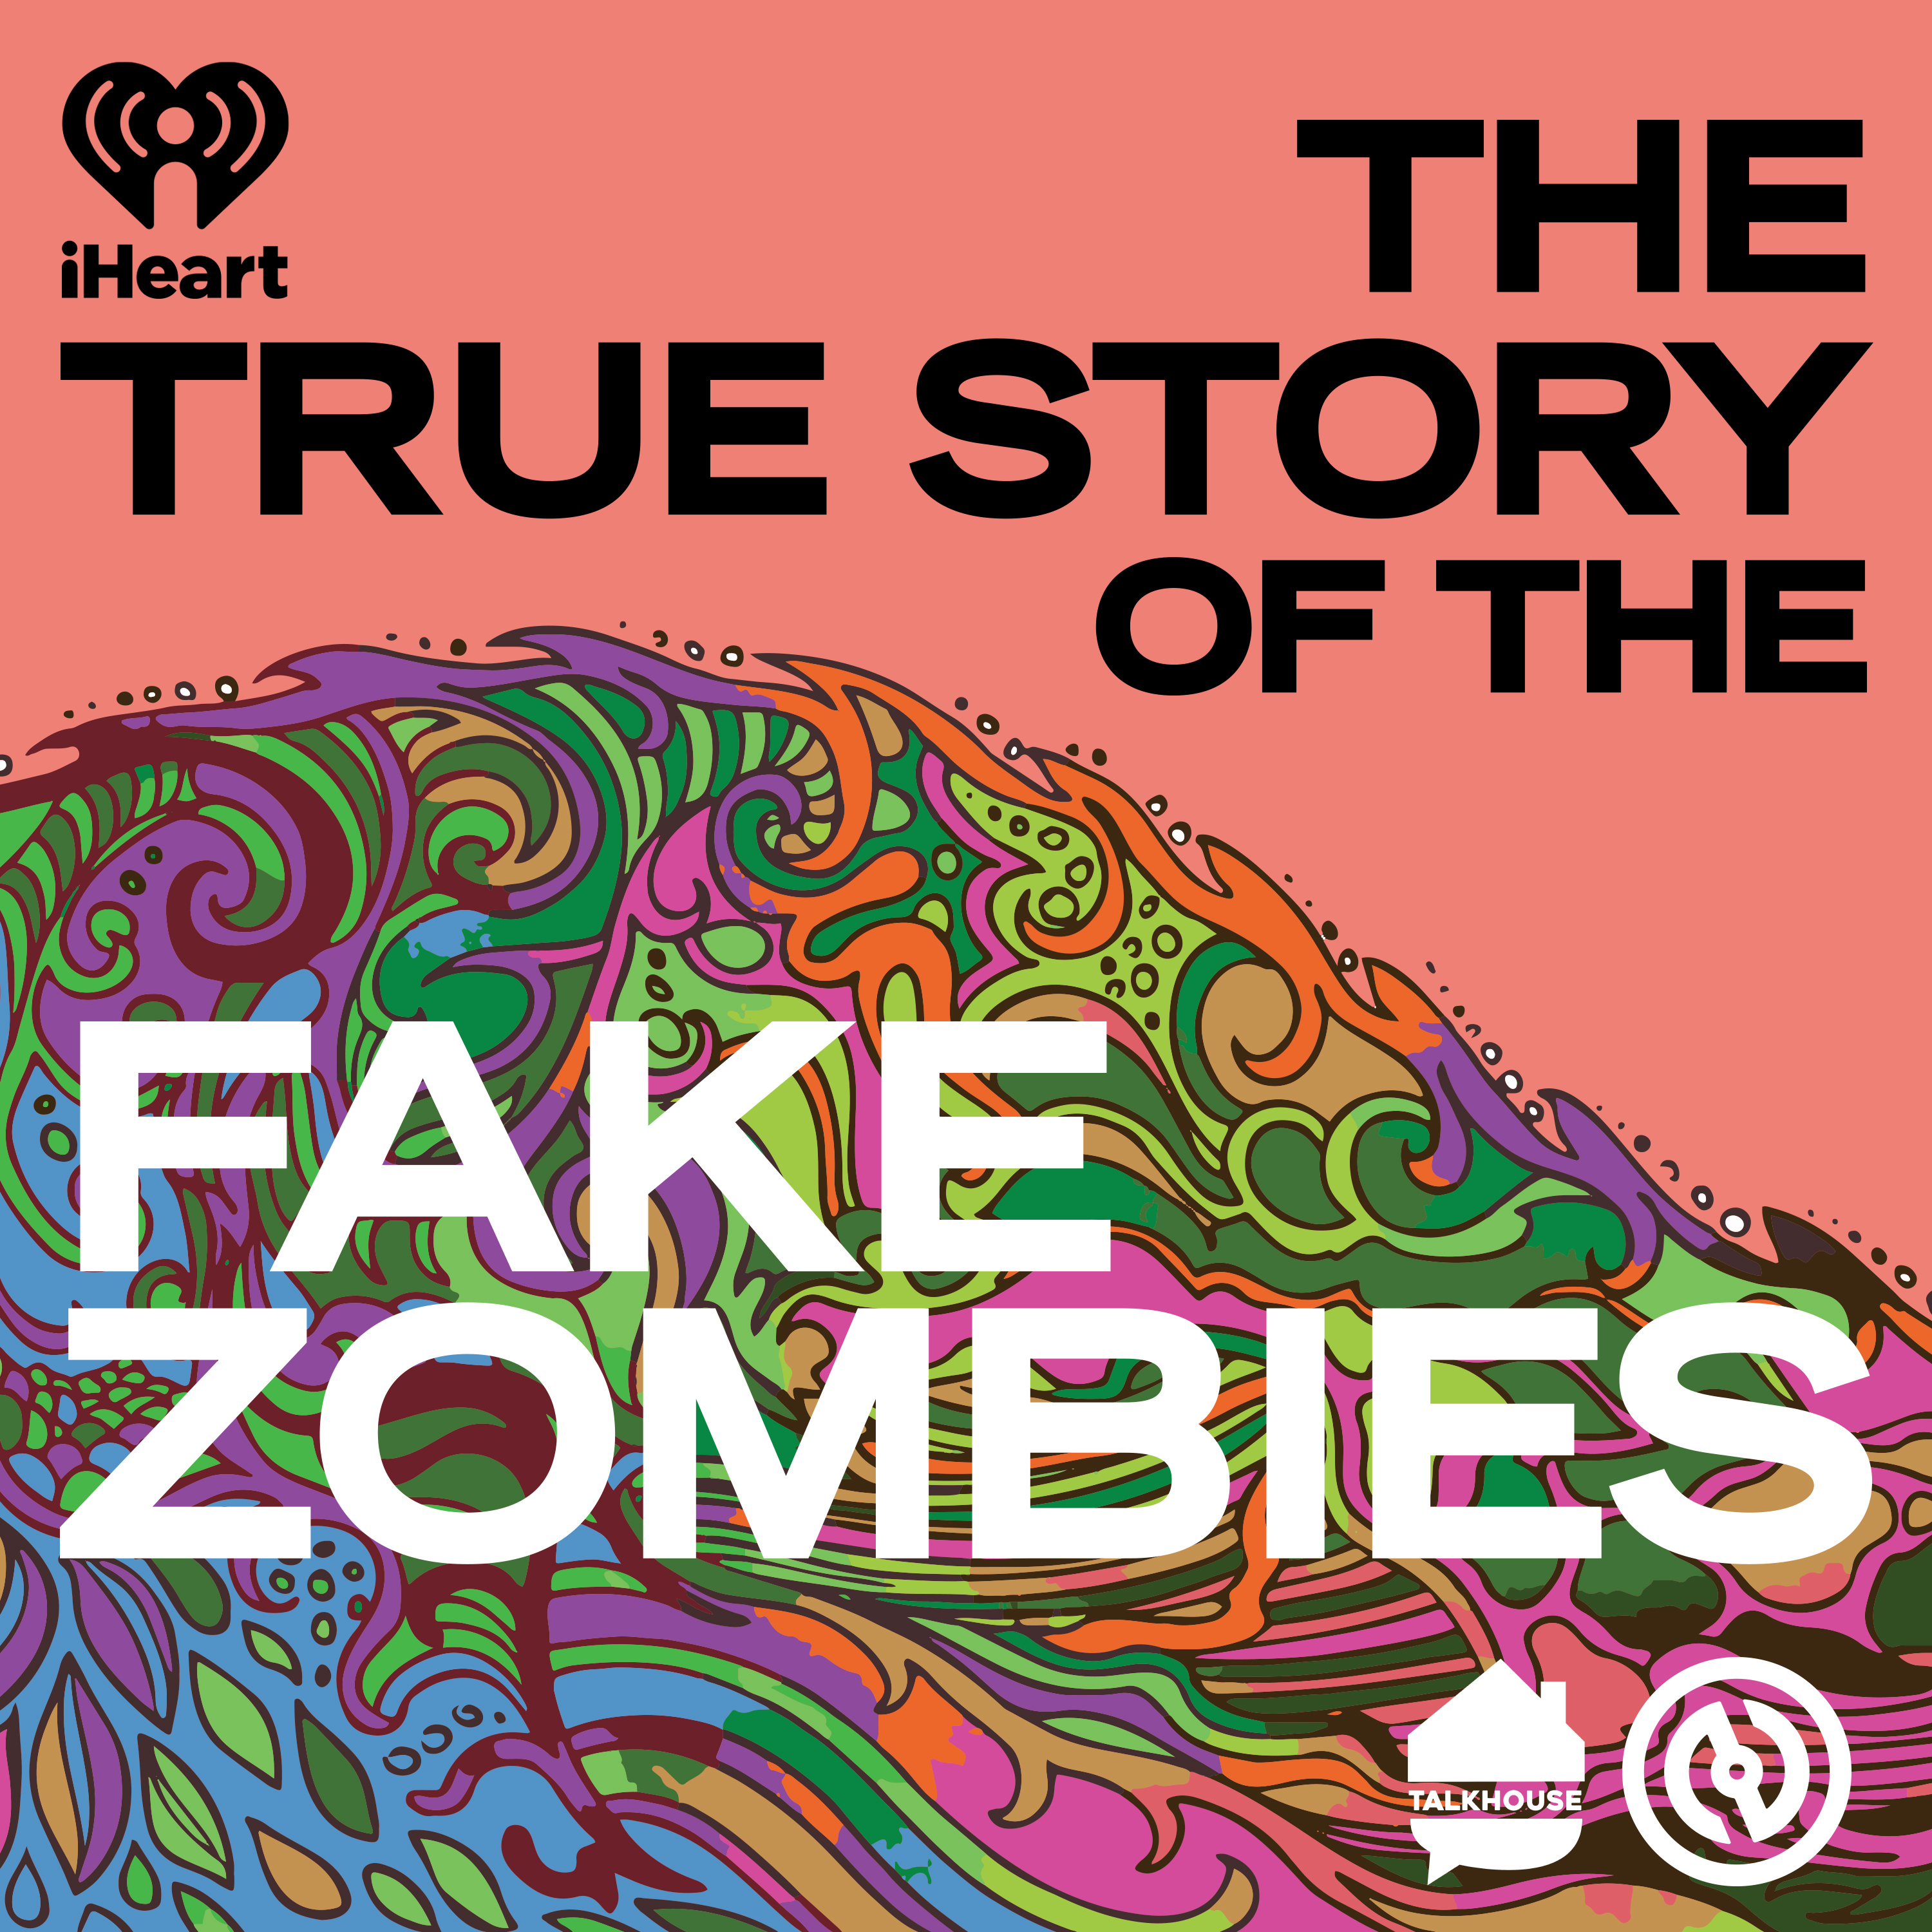 Introducing: The True Story of the Fake Zombies